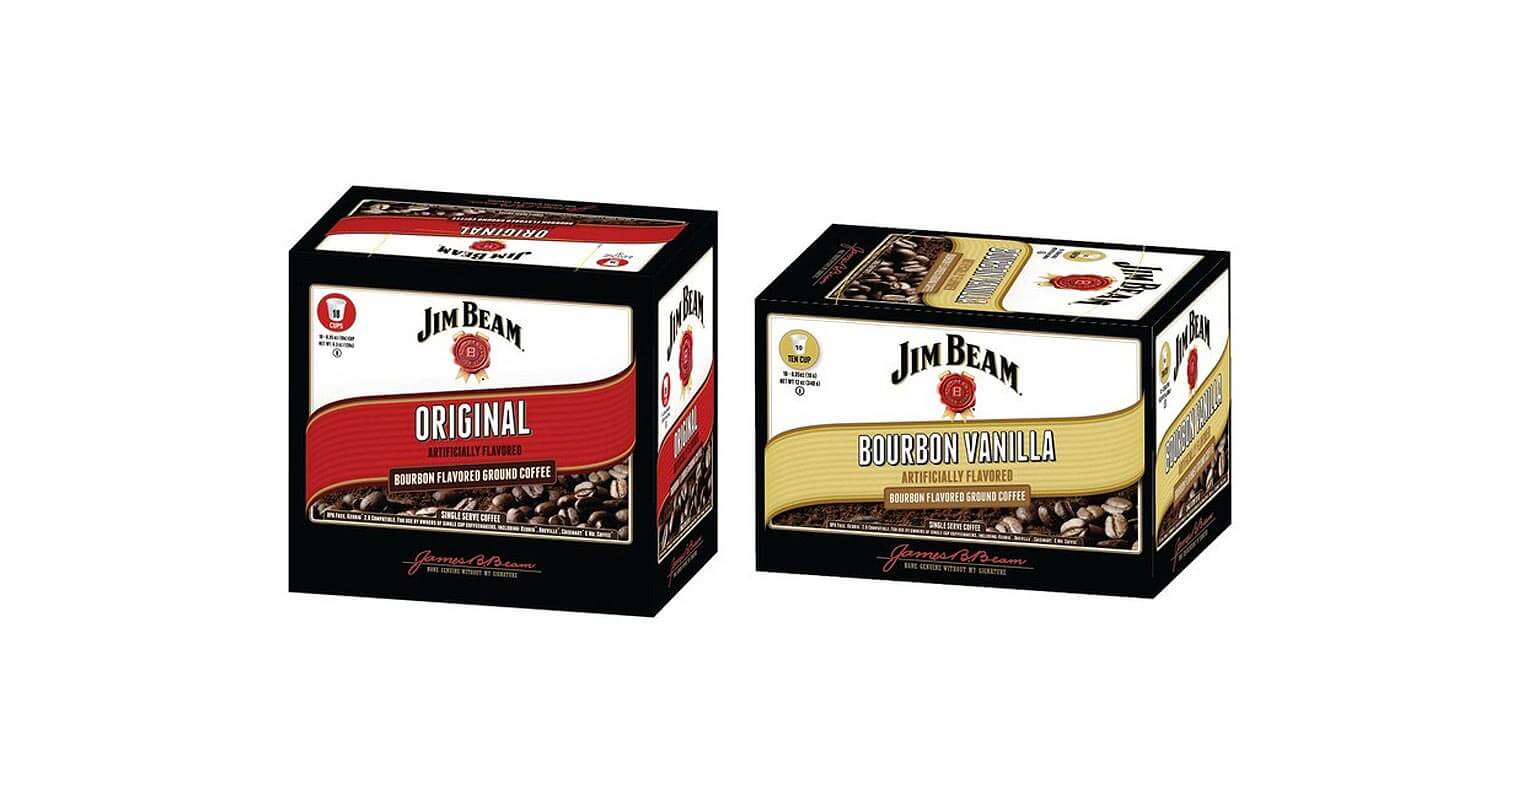 Jim Beam Bourbon Flavored Coffee Launches, featured image